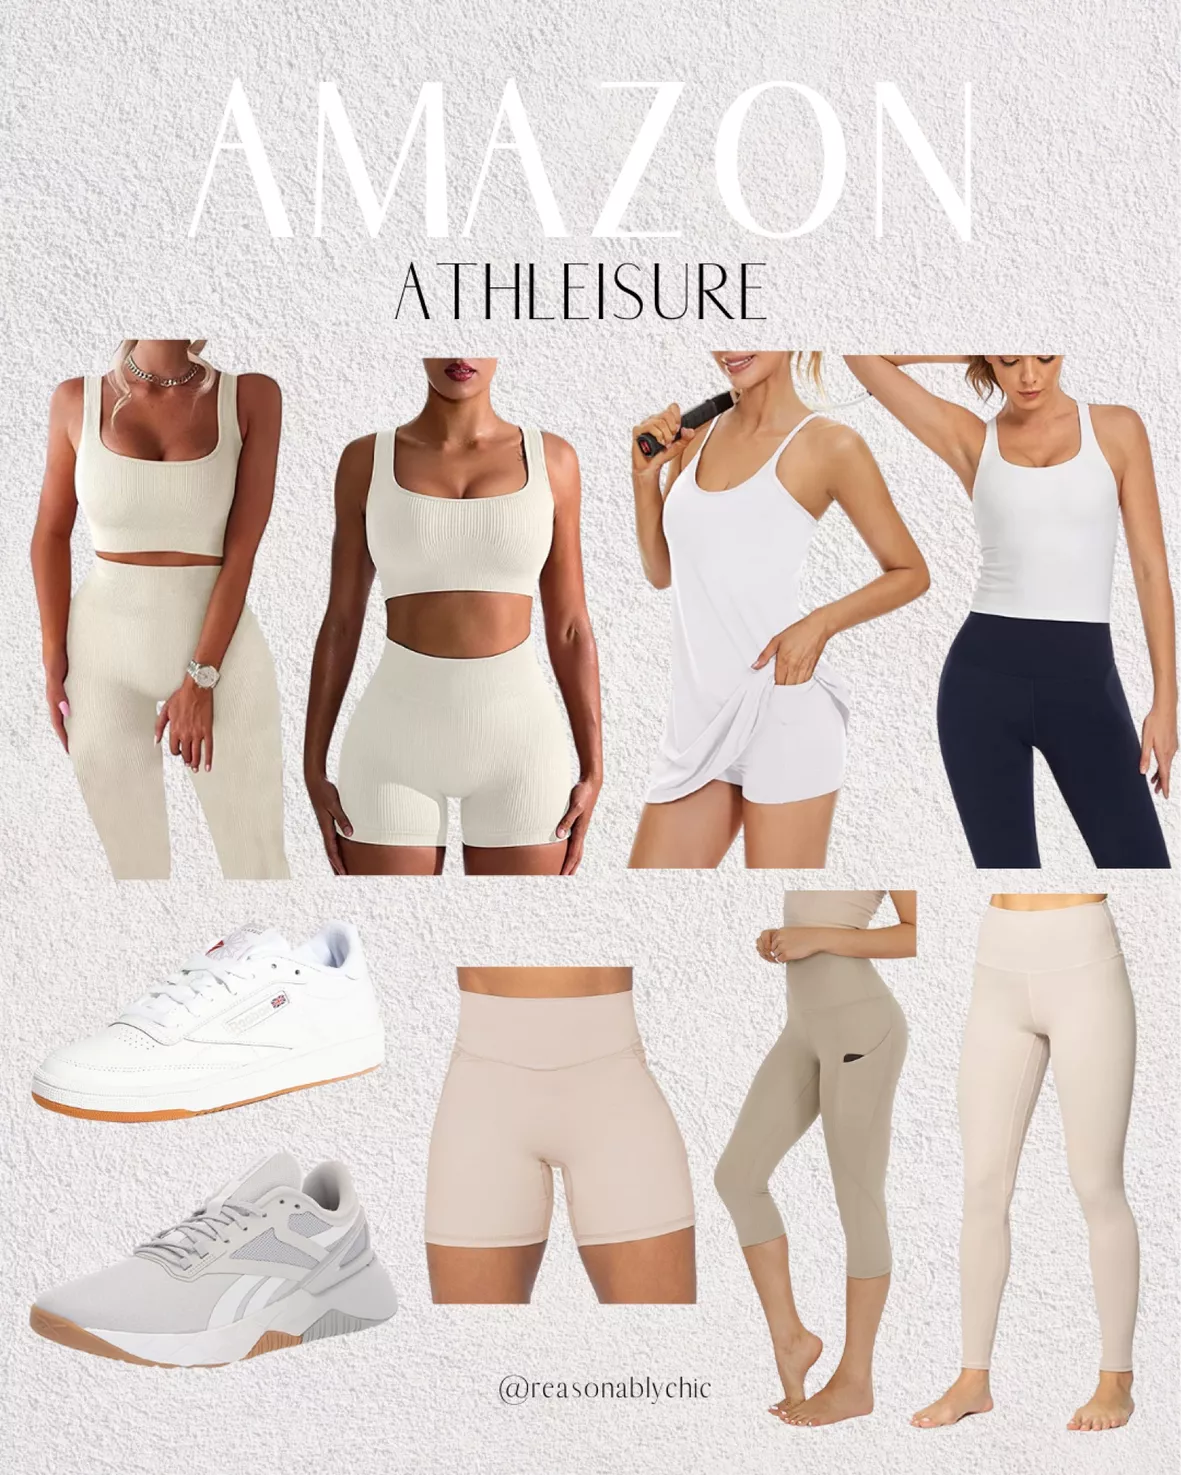 Women's Active Life, Fitness Athleisure Wear